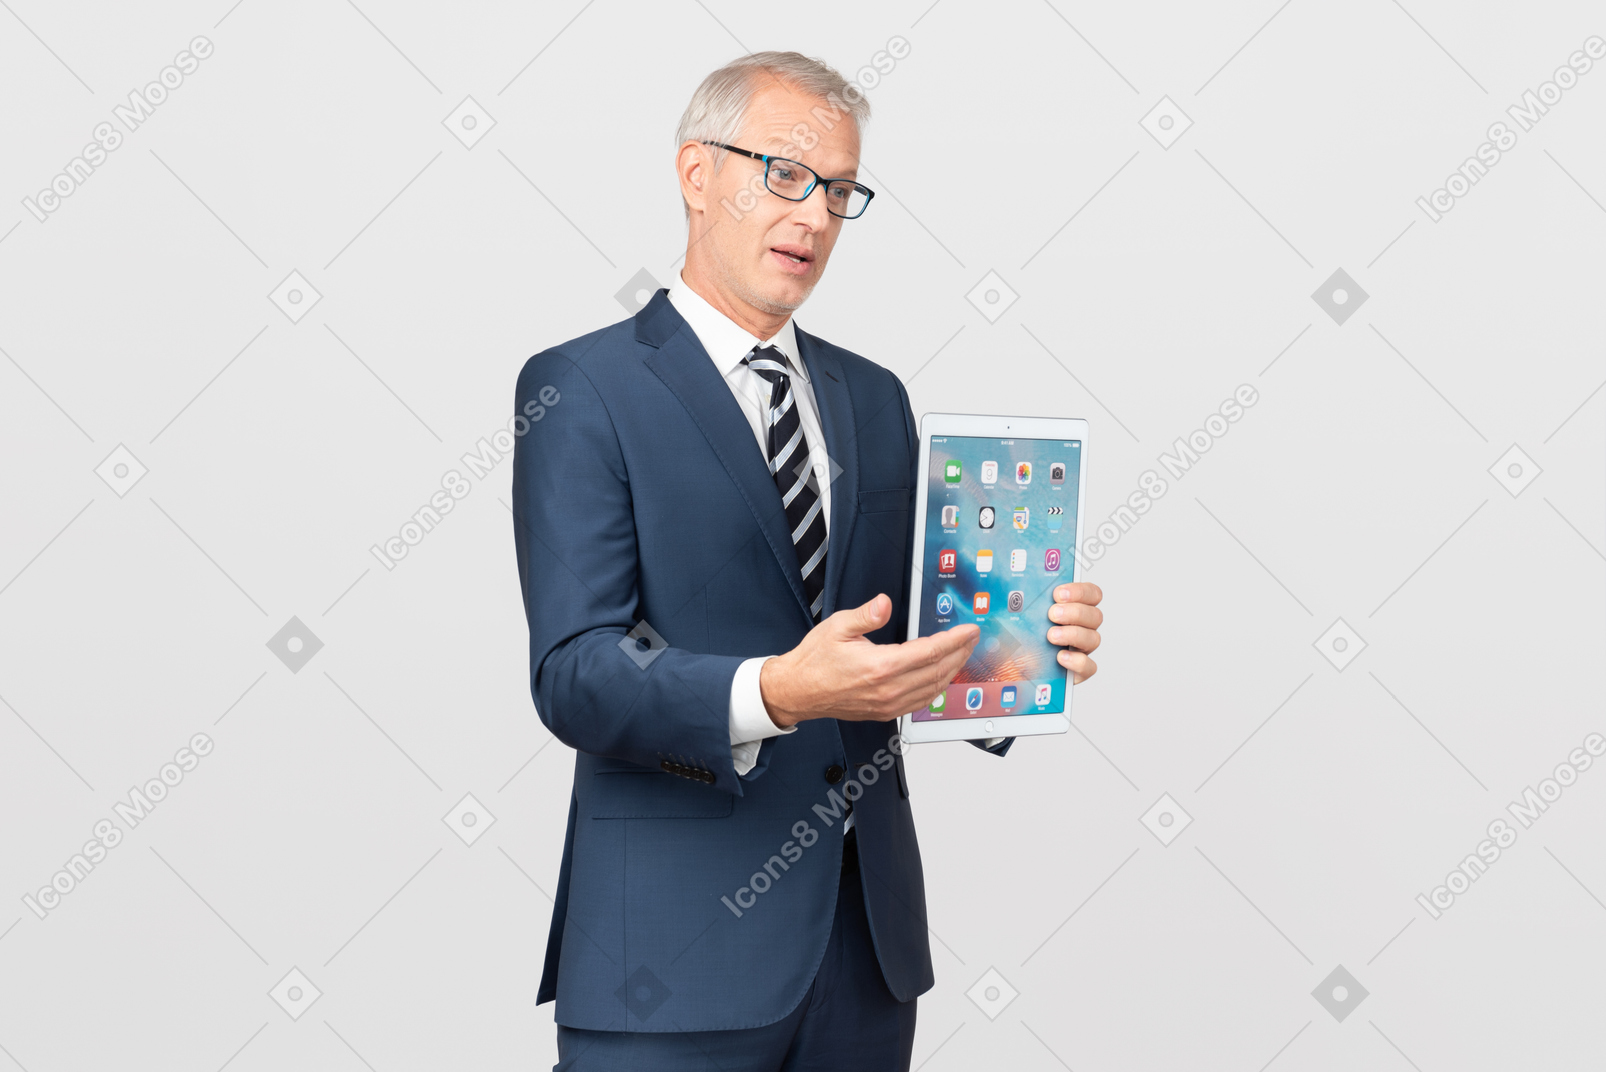 Elegant middle-aged business man showing his tablet